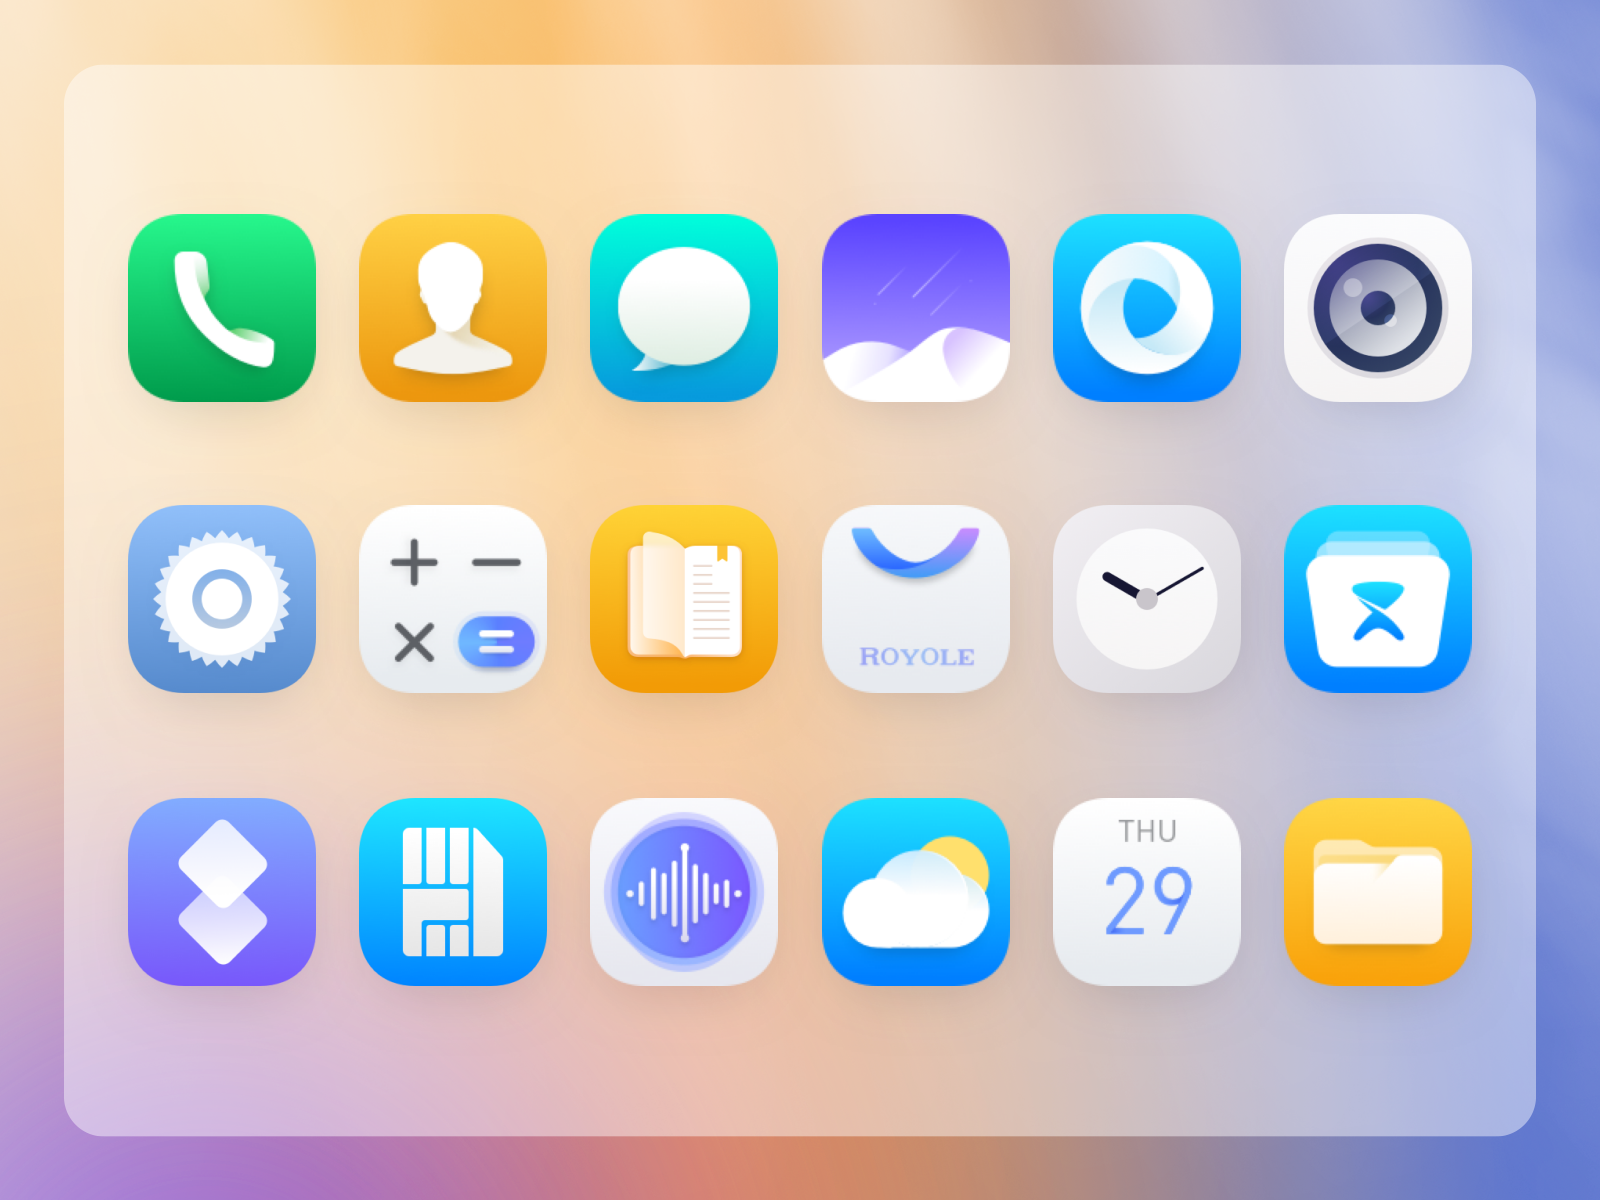 Theme Icons by Cary on Dribbble